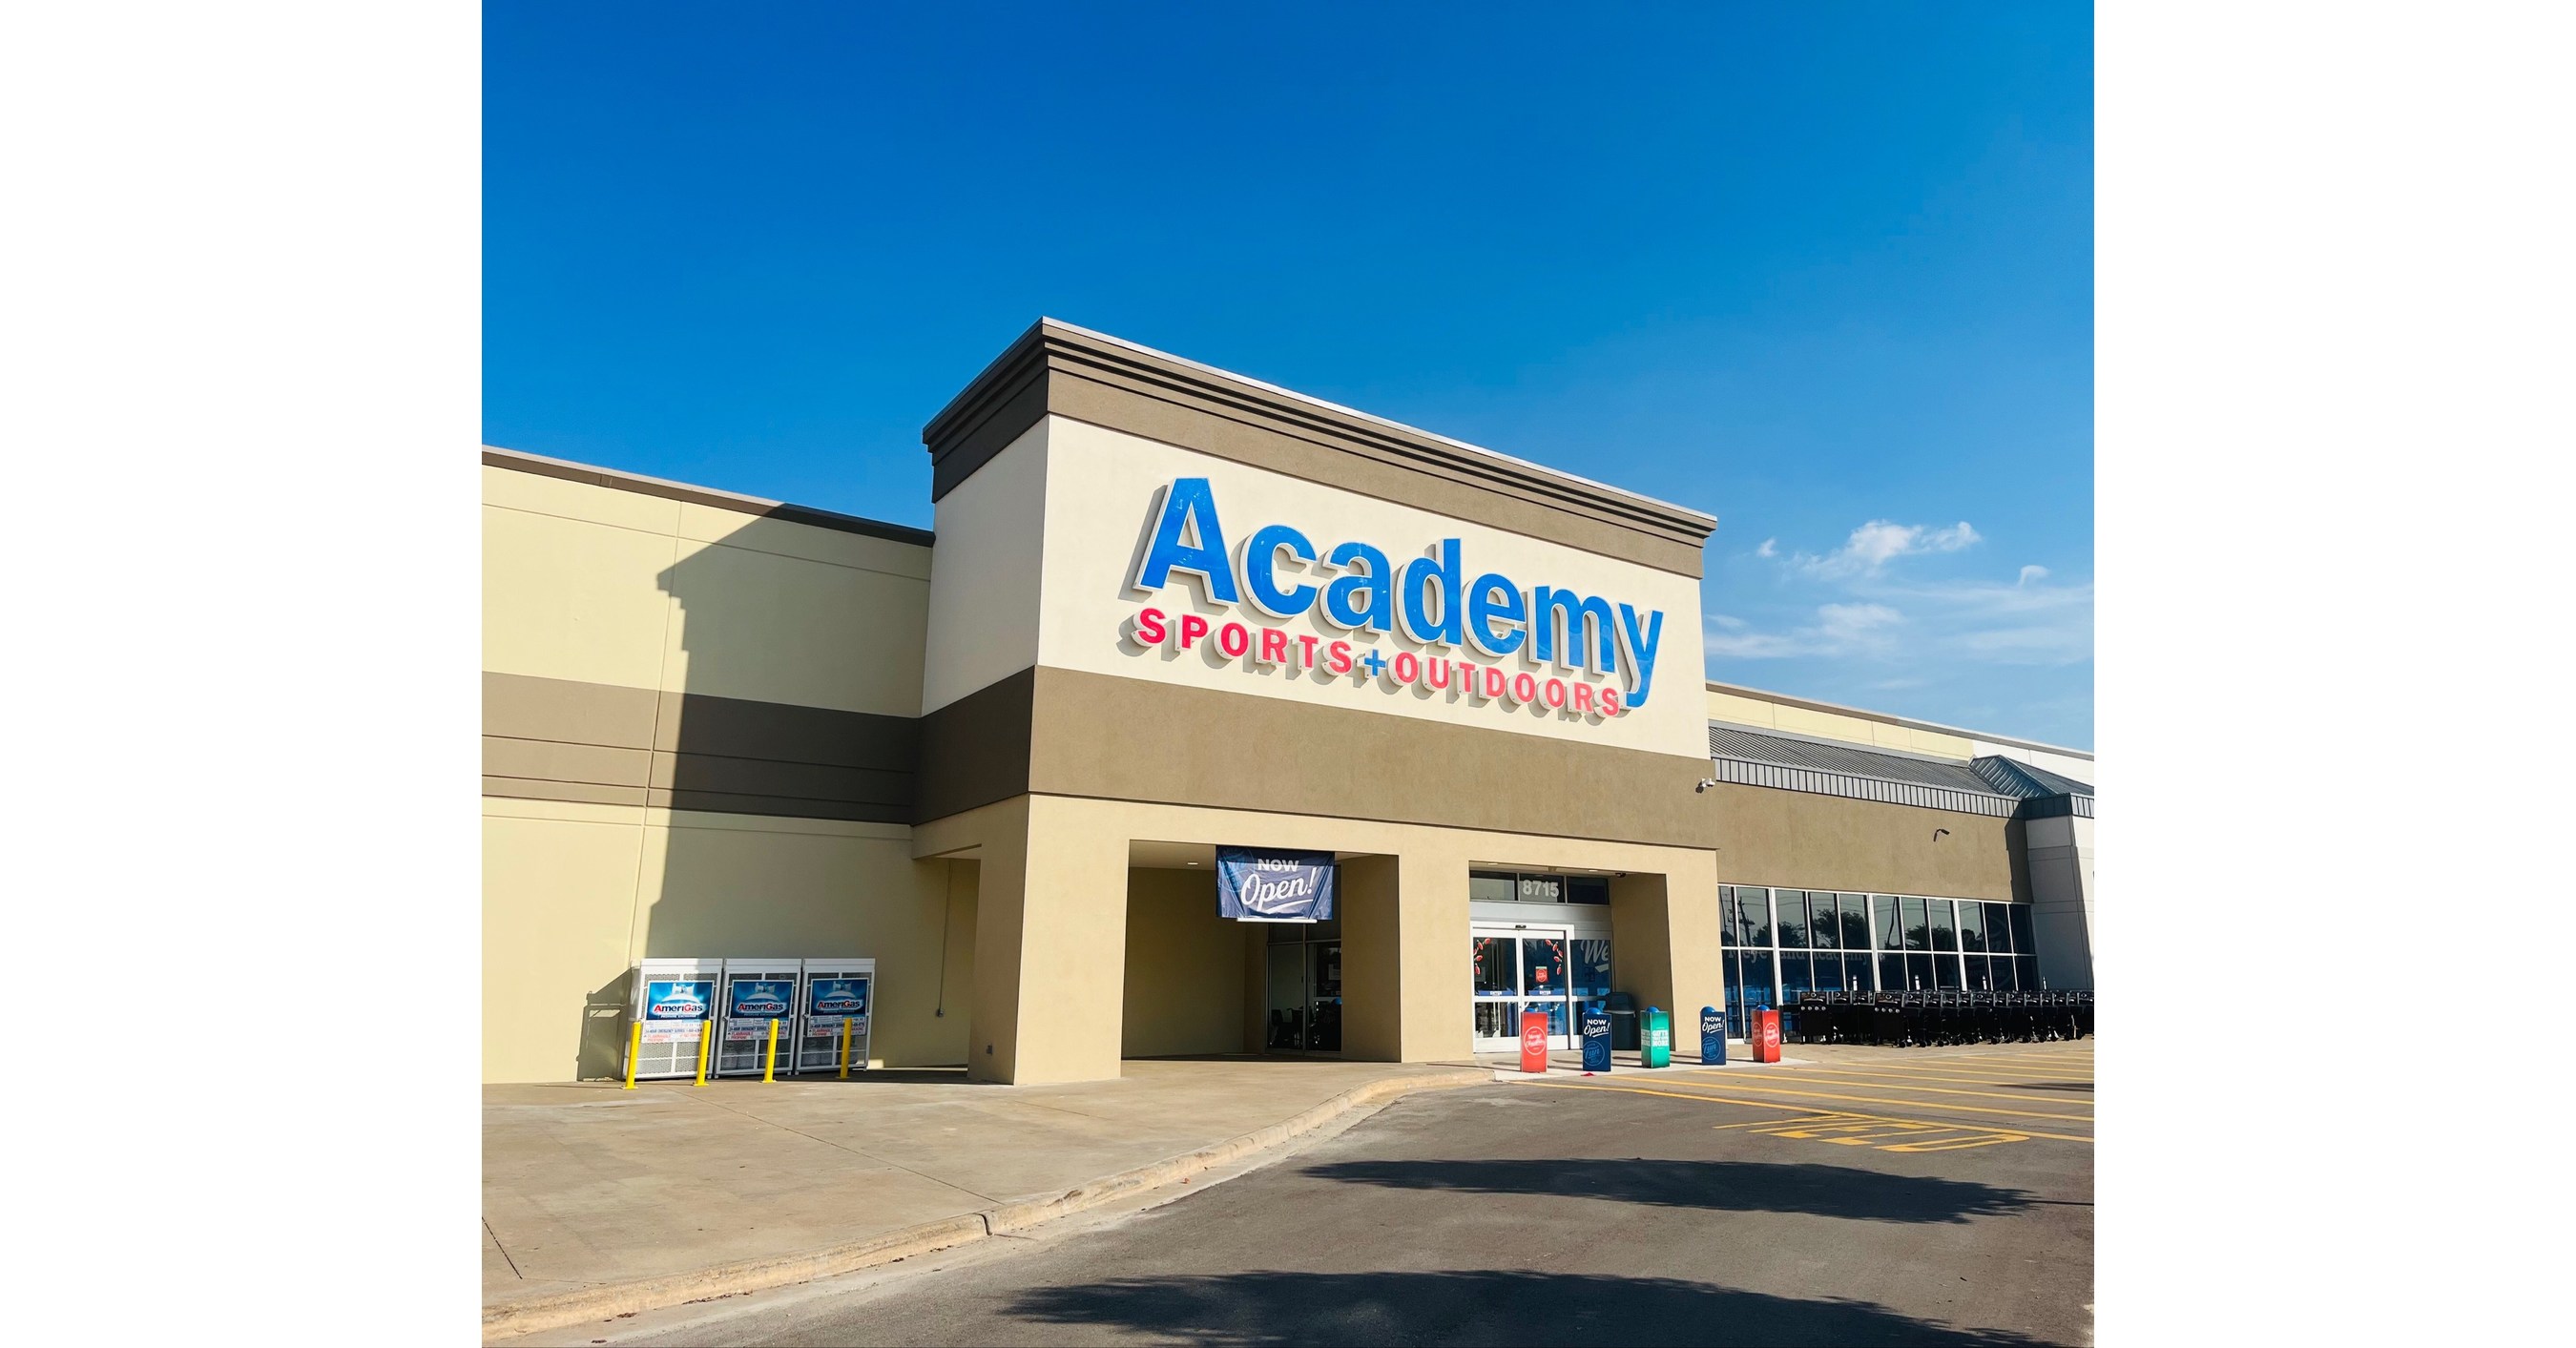 Academy Sports + Outdoors Continues Growth with New Store in